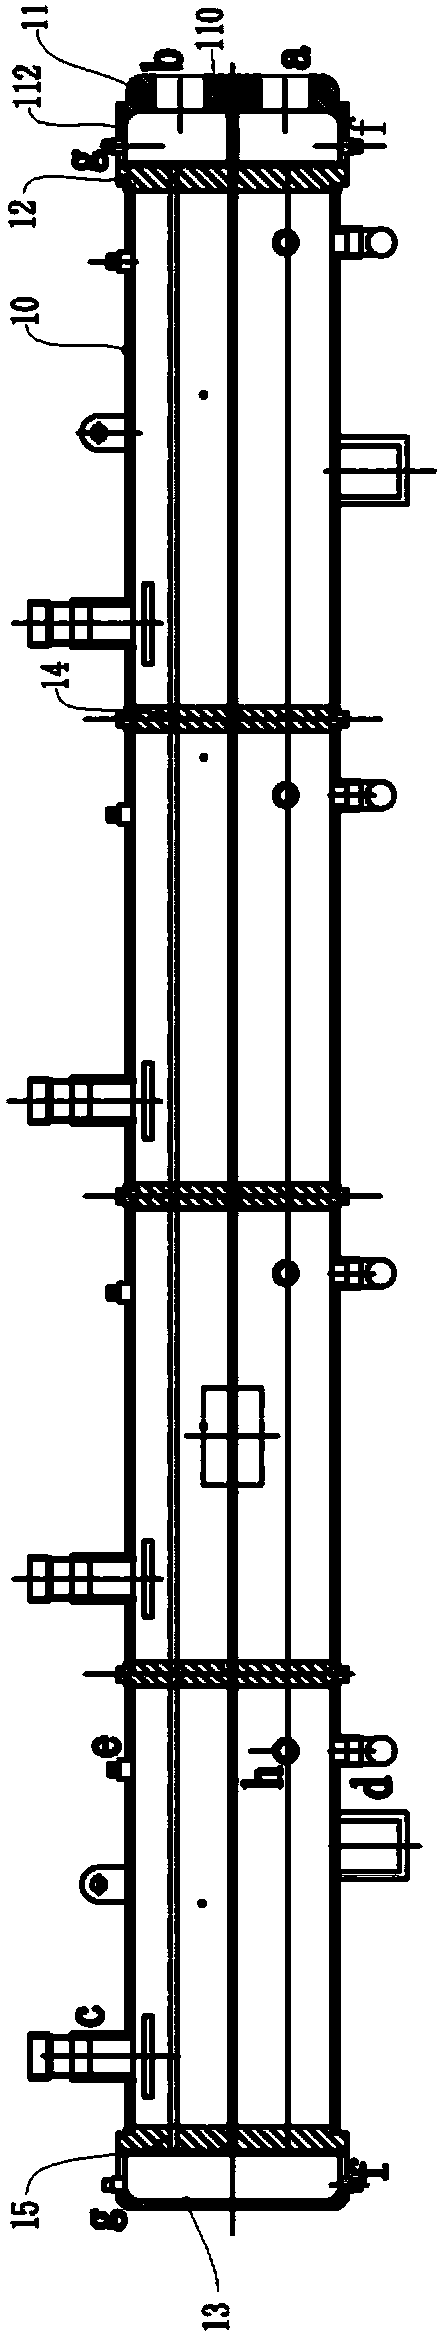 Refrigeration evaporator with multiple sections of outer shells and double separation plates